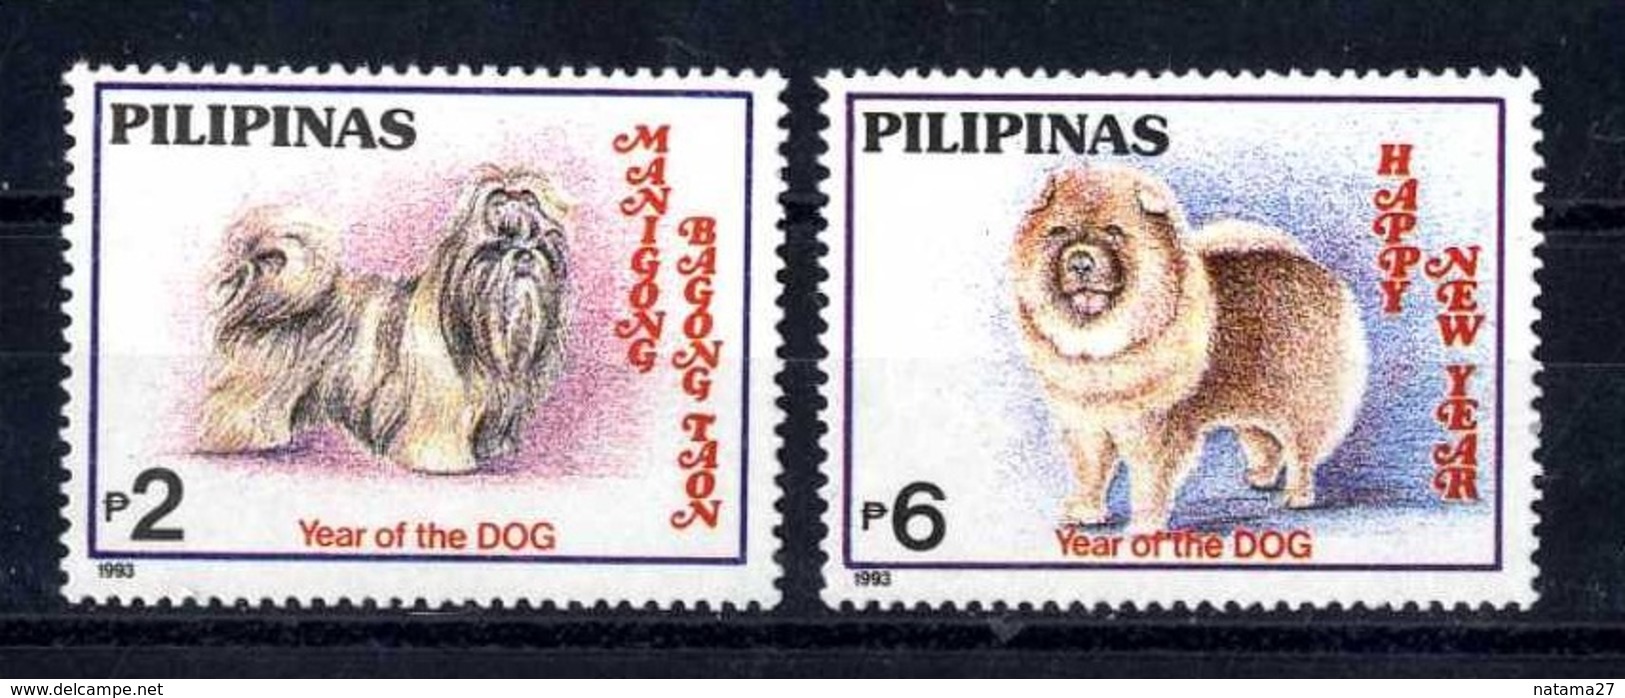 Filippine Philippines Philippinen Pilipinas 1993 Chinese New Year Of The Dog Set Of 2 Stamps - MNH** (see Photo) - Filippine